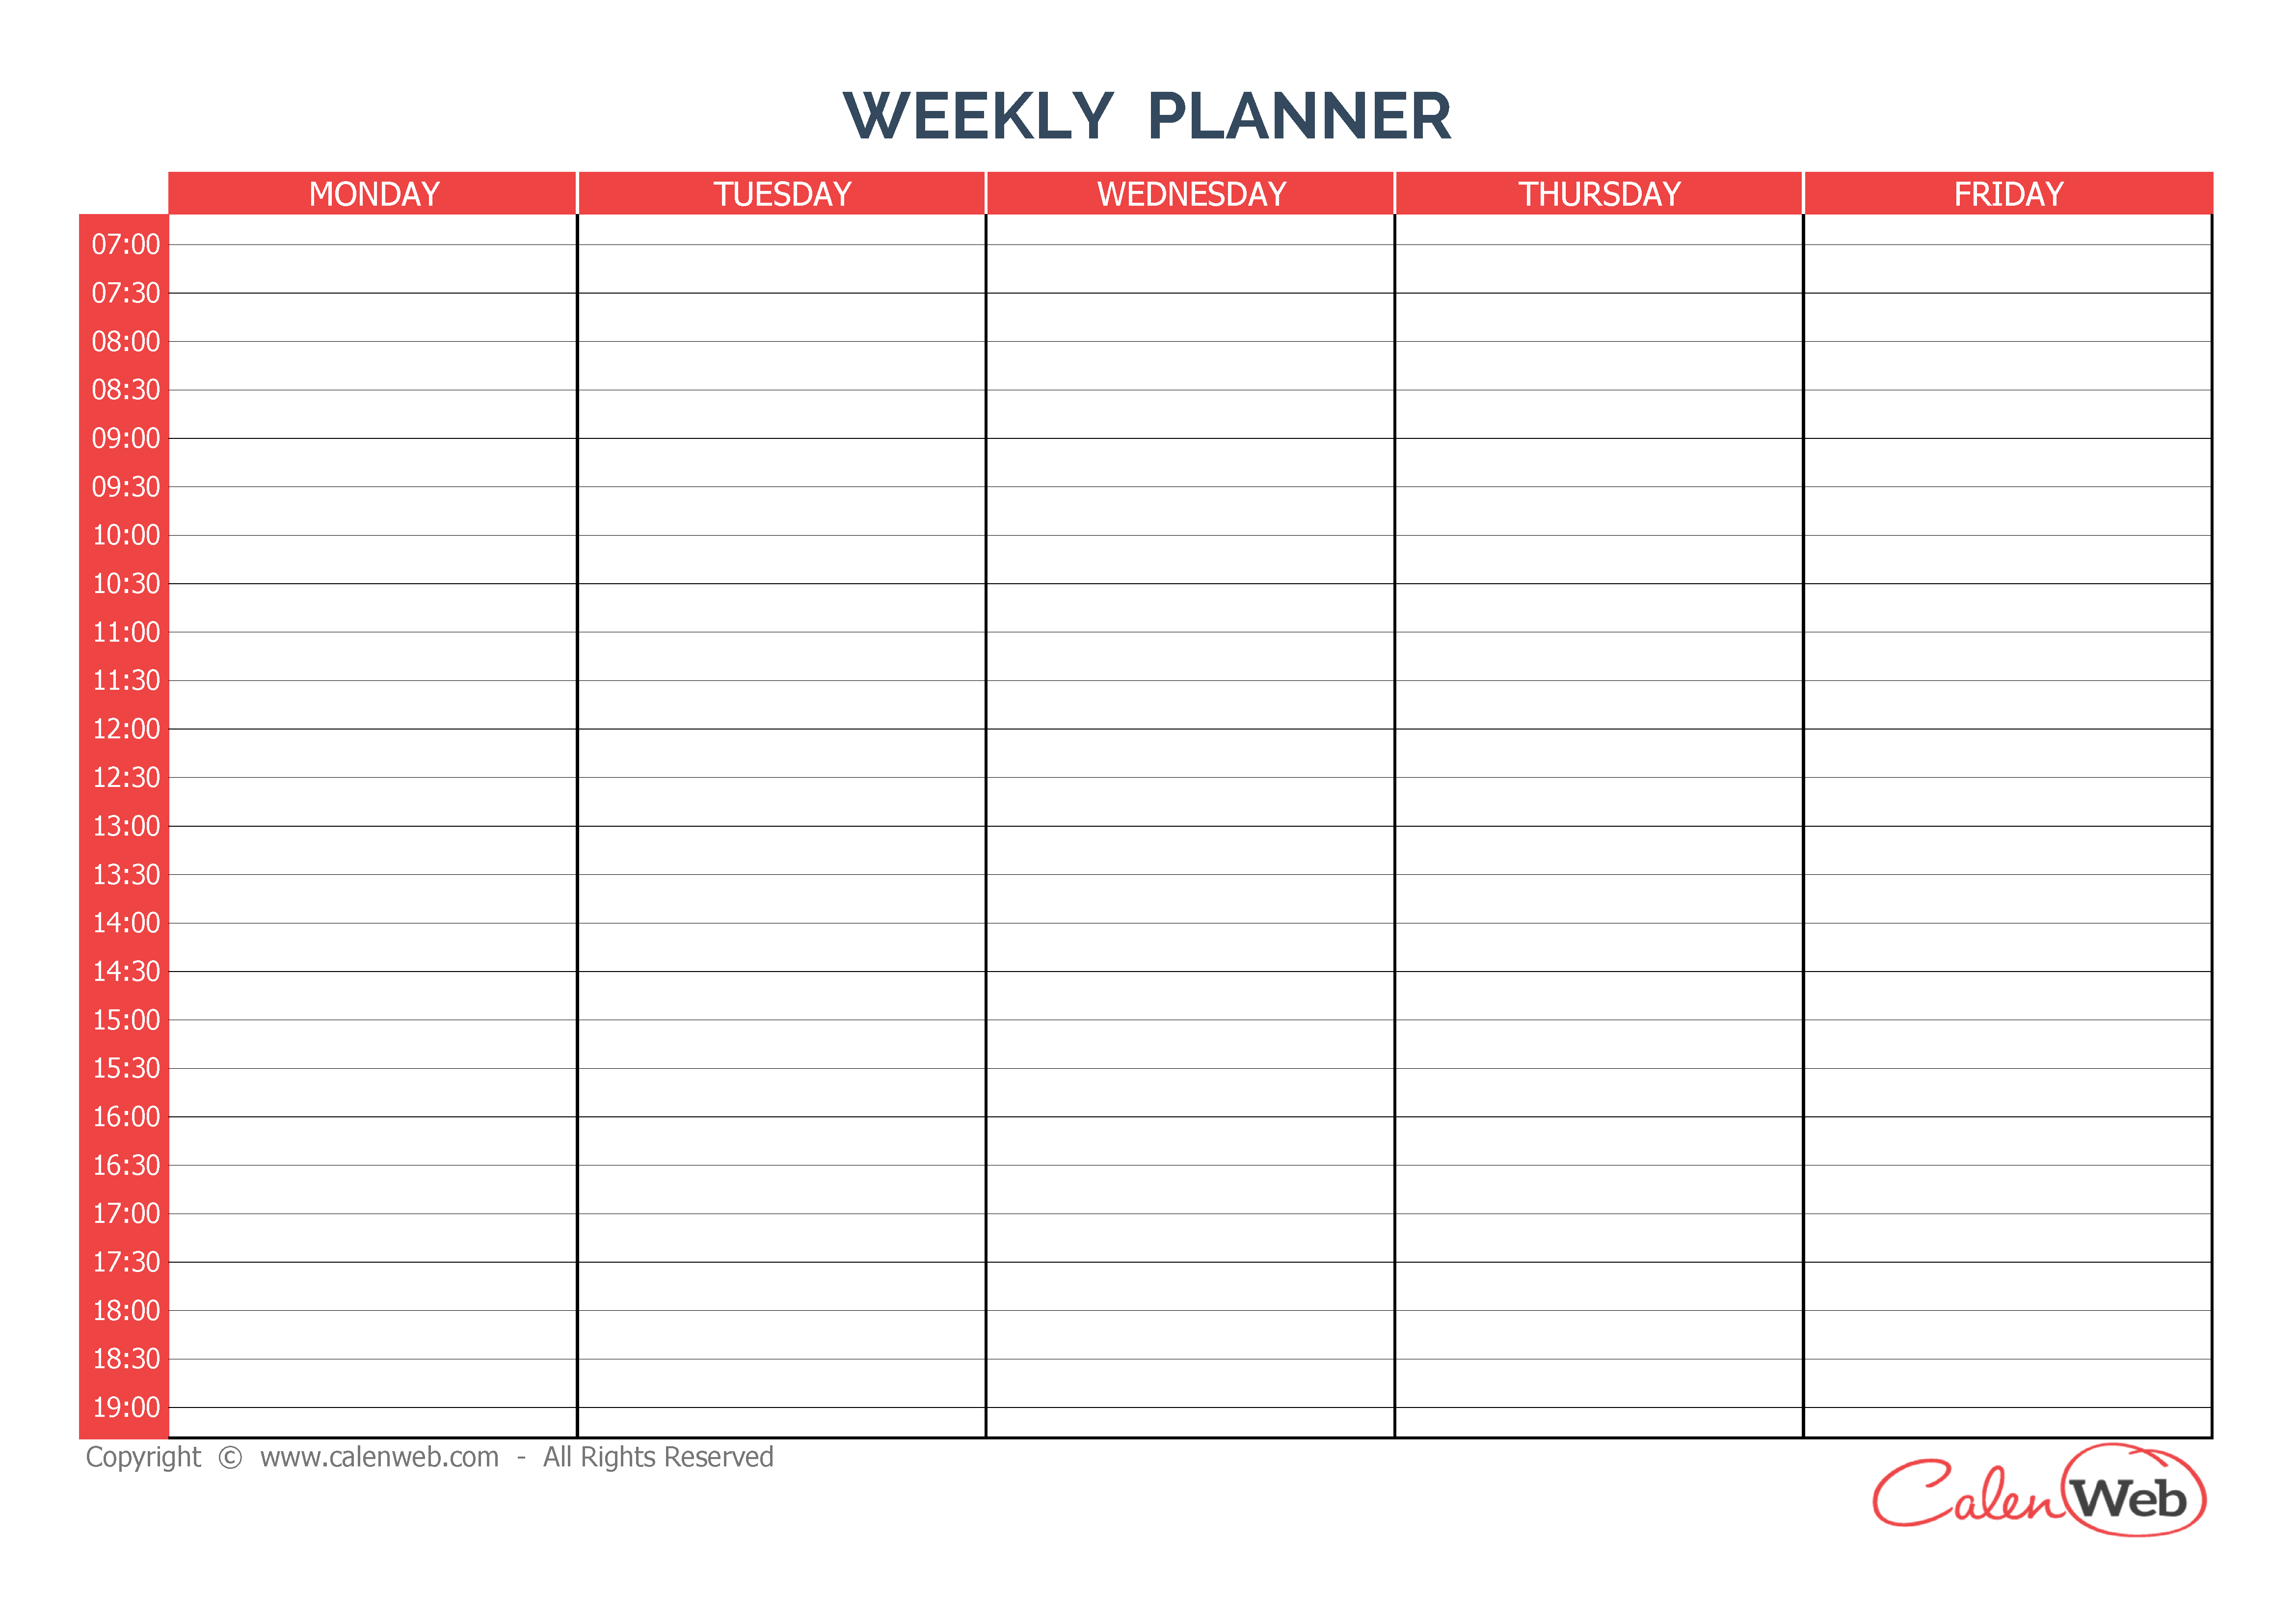 Weekly Planner 5 Days A Week Of 5 Days Calenweb